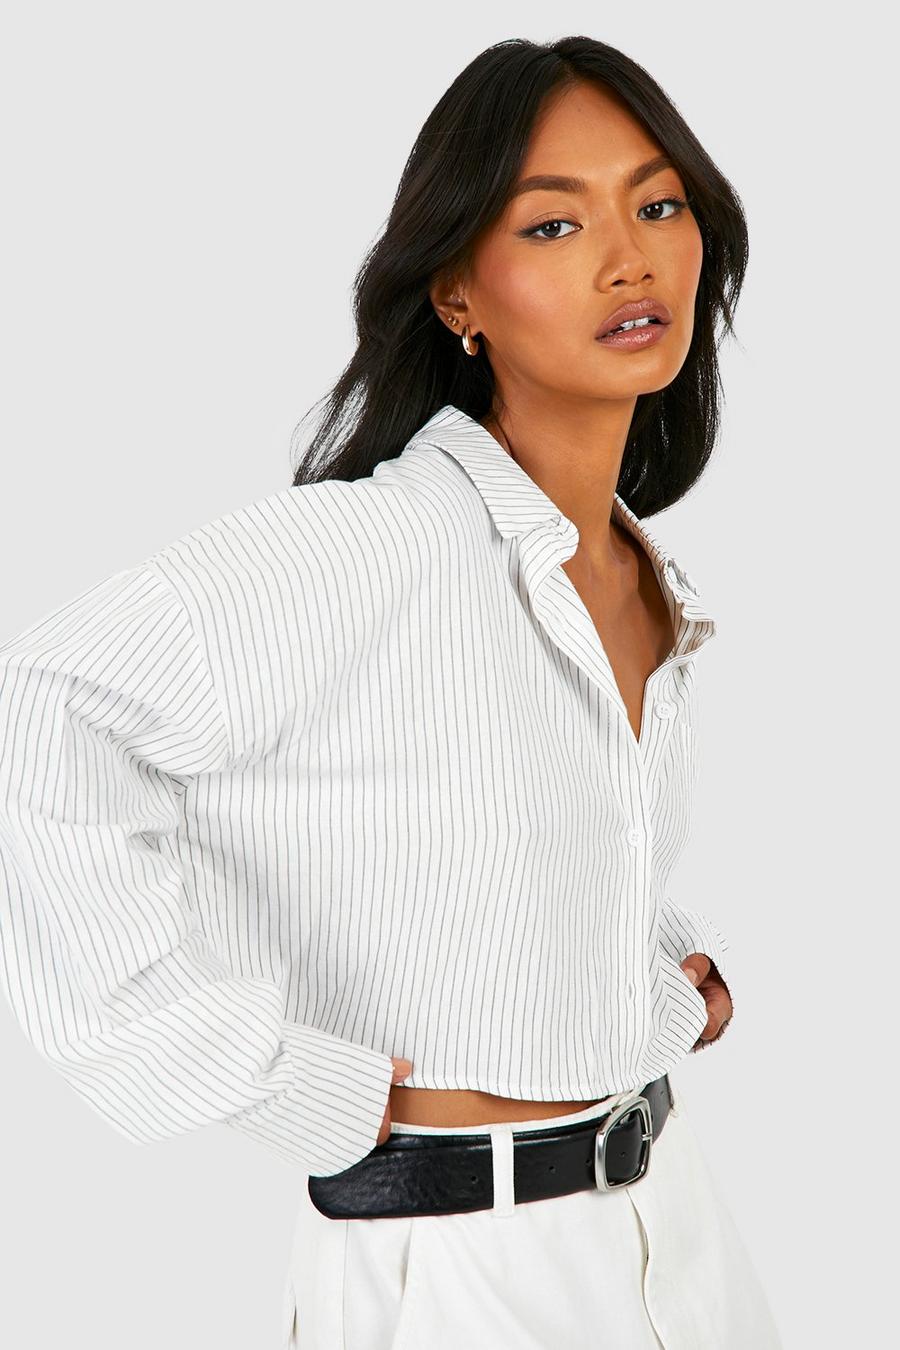 Clearance Warehouse Deals Womens Button Down Shirts Ruffle Trim Mock V Neck  Tops Classic Long Sleeve Elegant Collared Office Work Blouses Clothes Blue  at  Women's Clothing store